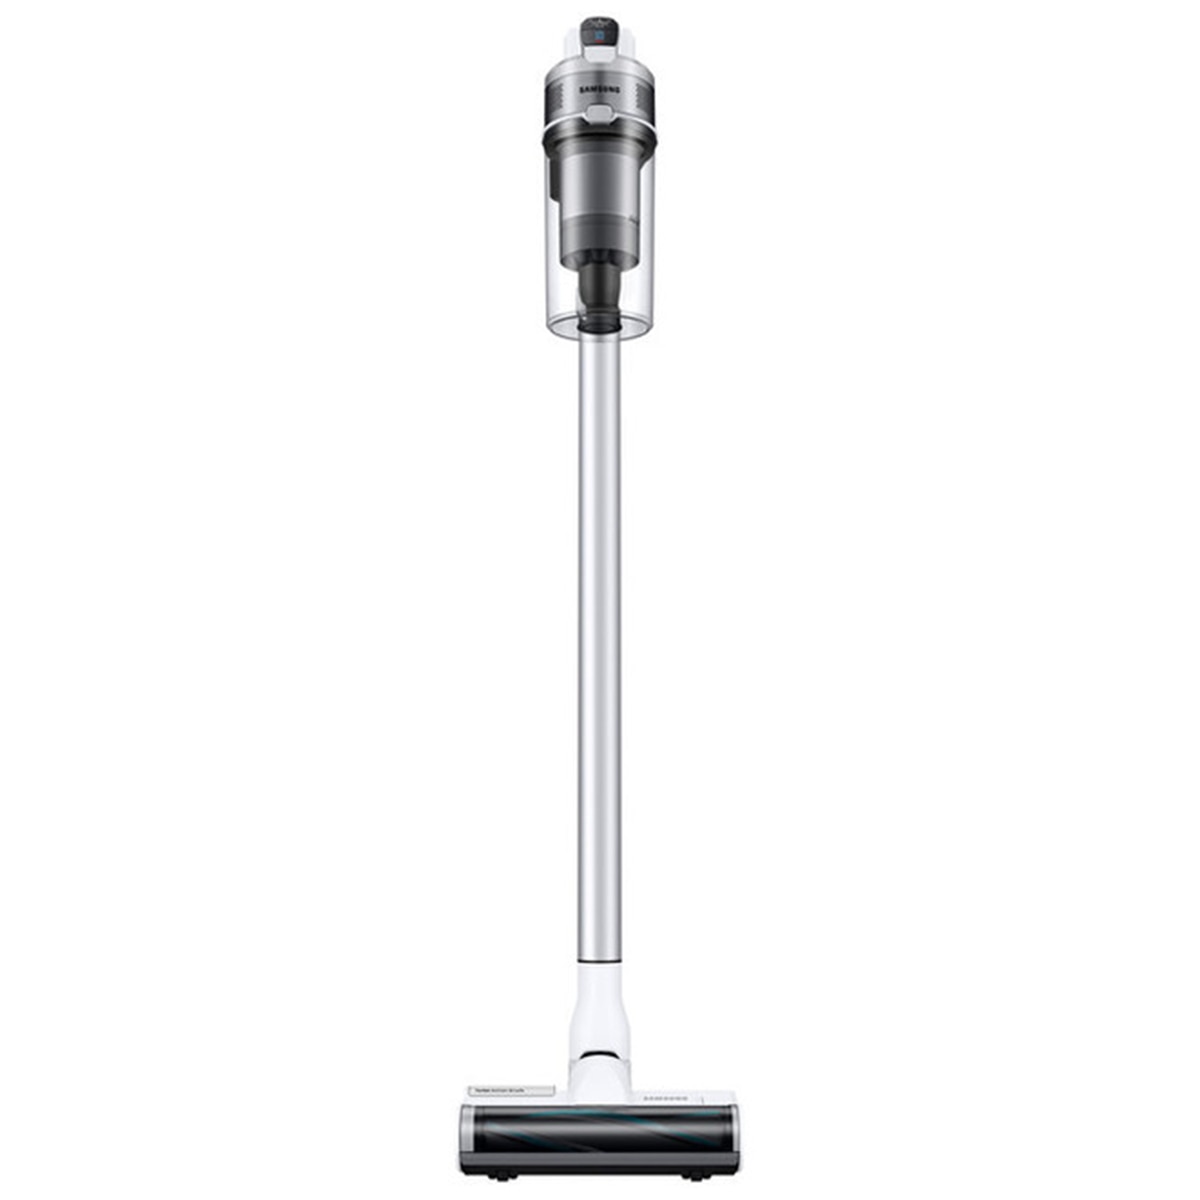 Samsung Jet 70 Pro Stick Vac with Spinning Sweeper Tool